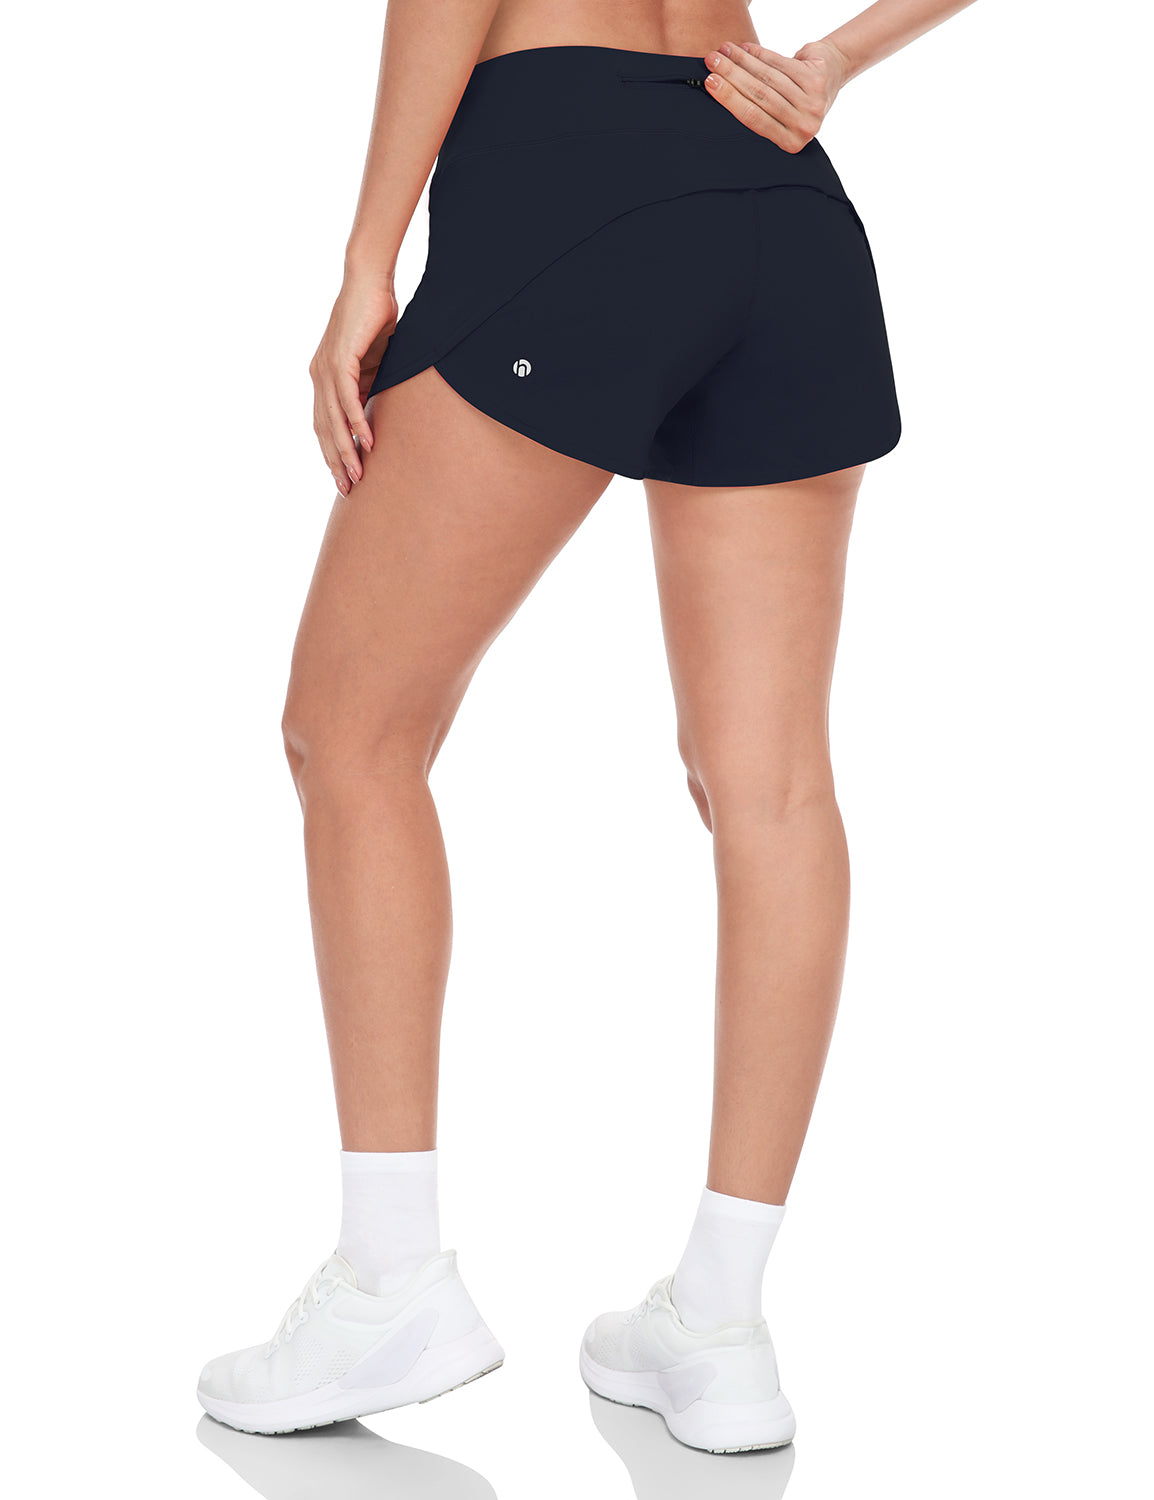  HeyNuts My Pace Running Shorts For Women, Mid